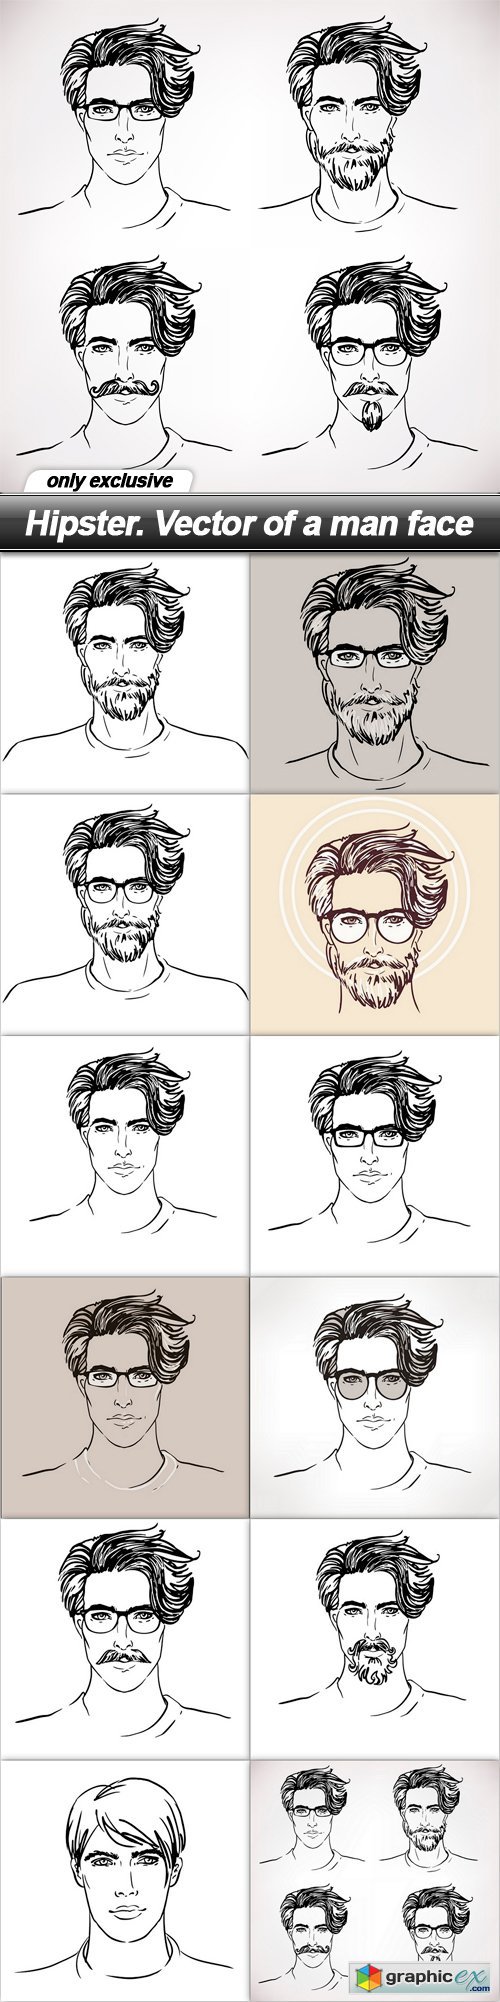 Hipster. Vector of a man face - 12 EPS